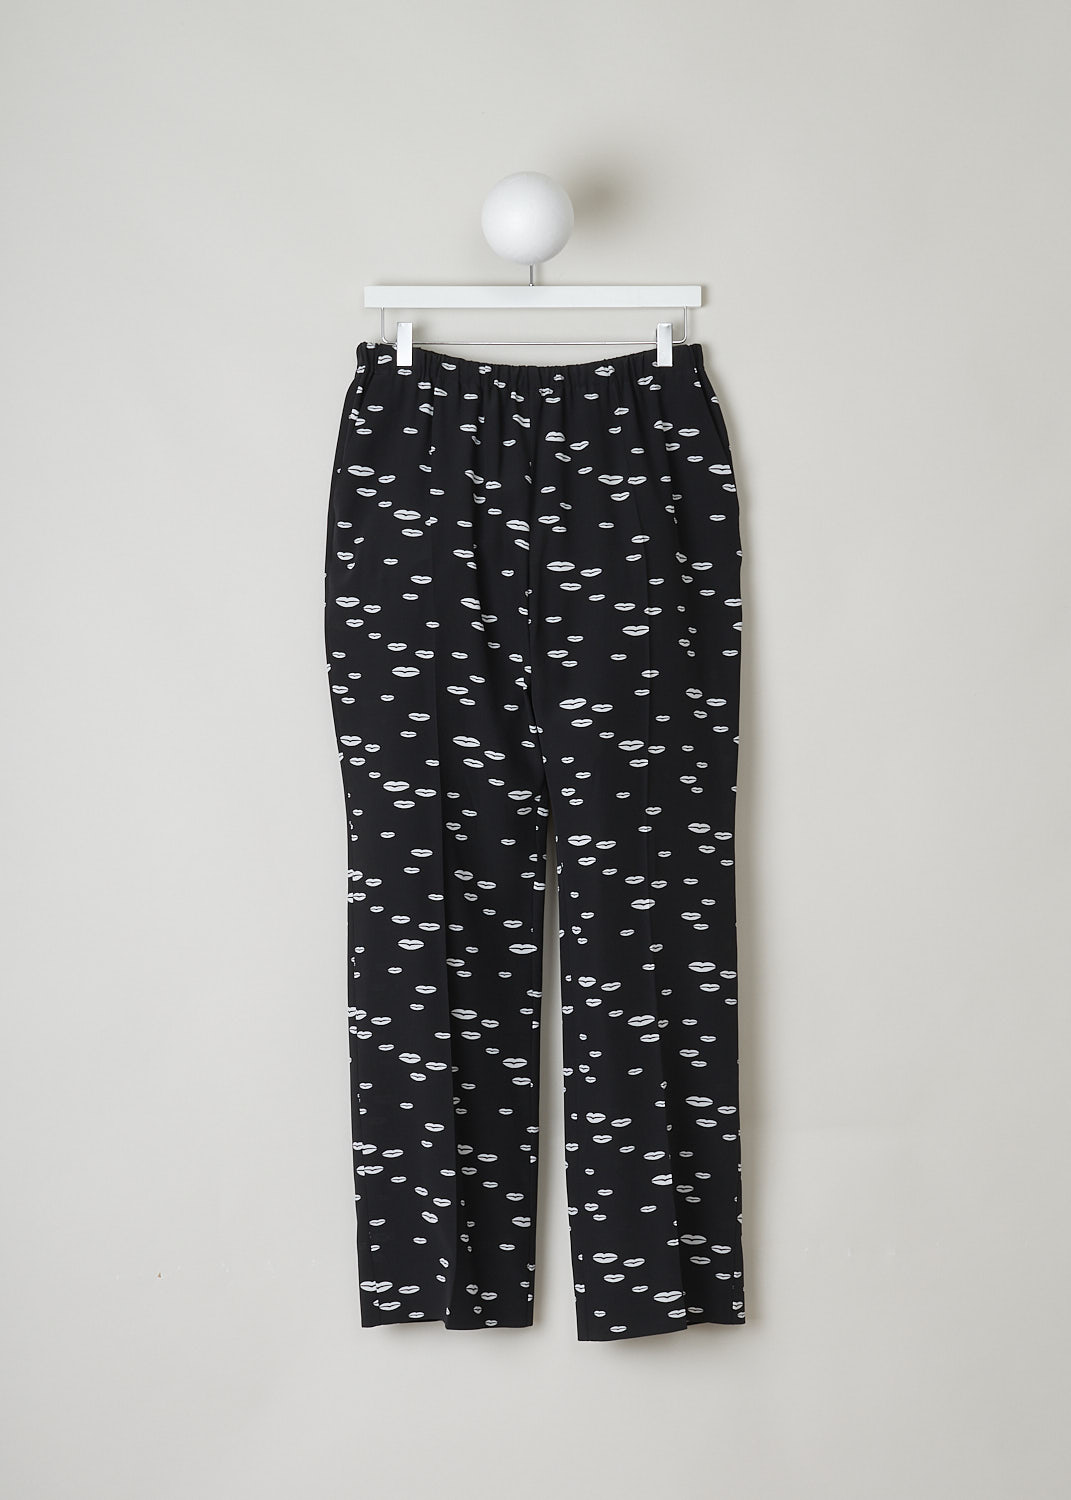 PRADA, BLACK PANTS WITH WHITE LIP PRINT, CDC_BOCCA_P235E_F057Z_NERO_AVORIO, Black, White, Print, Front, These black silk pants have an all-over lip print in white. This slip-on model has an elasticated waistline. These pants have slanted pockets in the front and welt pockets in the back. The straight pant legs have centre creases. 